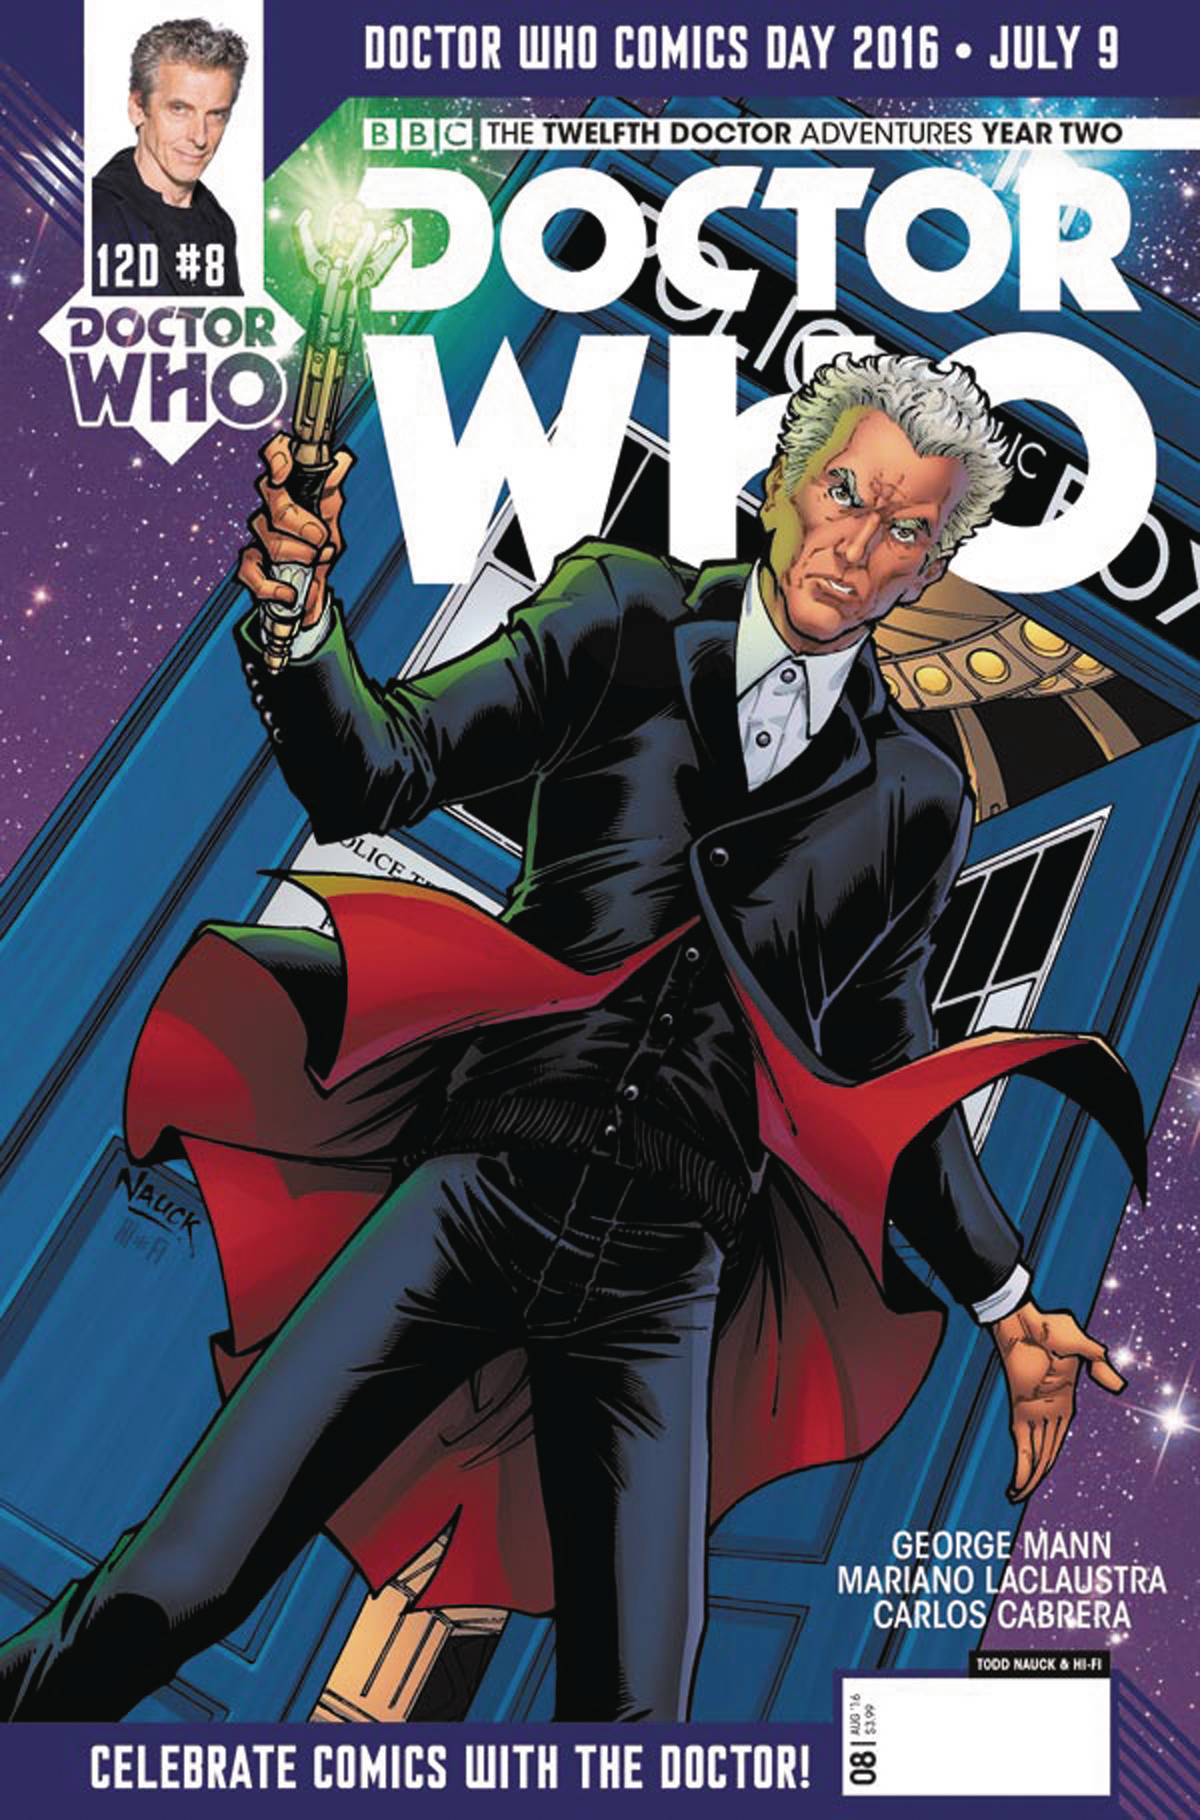 Doctor Who 12th Year Two #9 Cover E Doctor Who Day